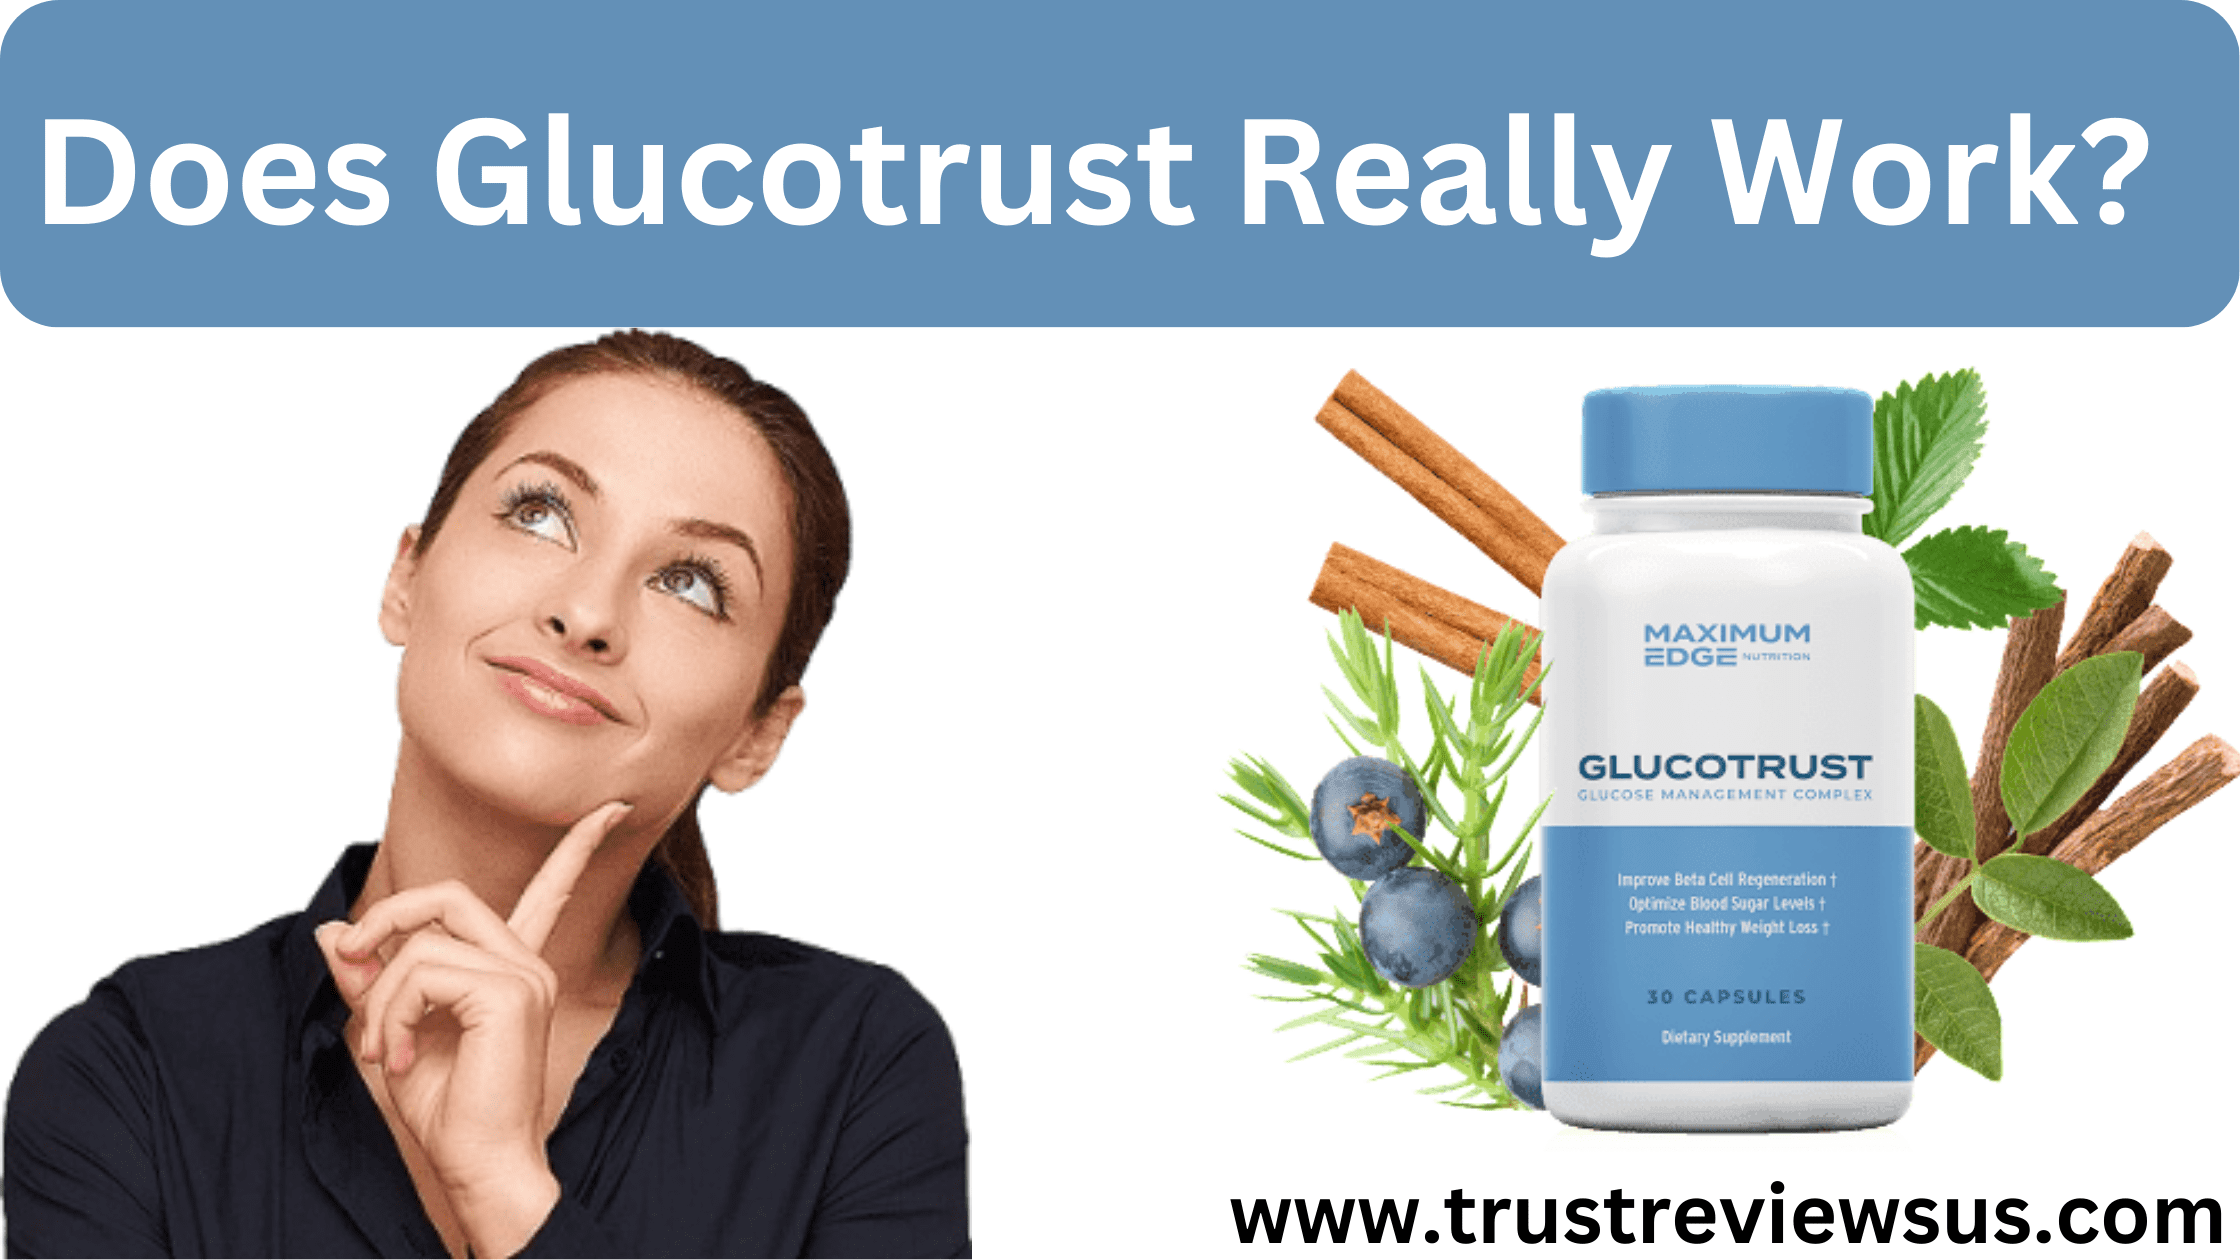 Does Glucotrust Really Work